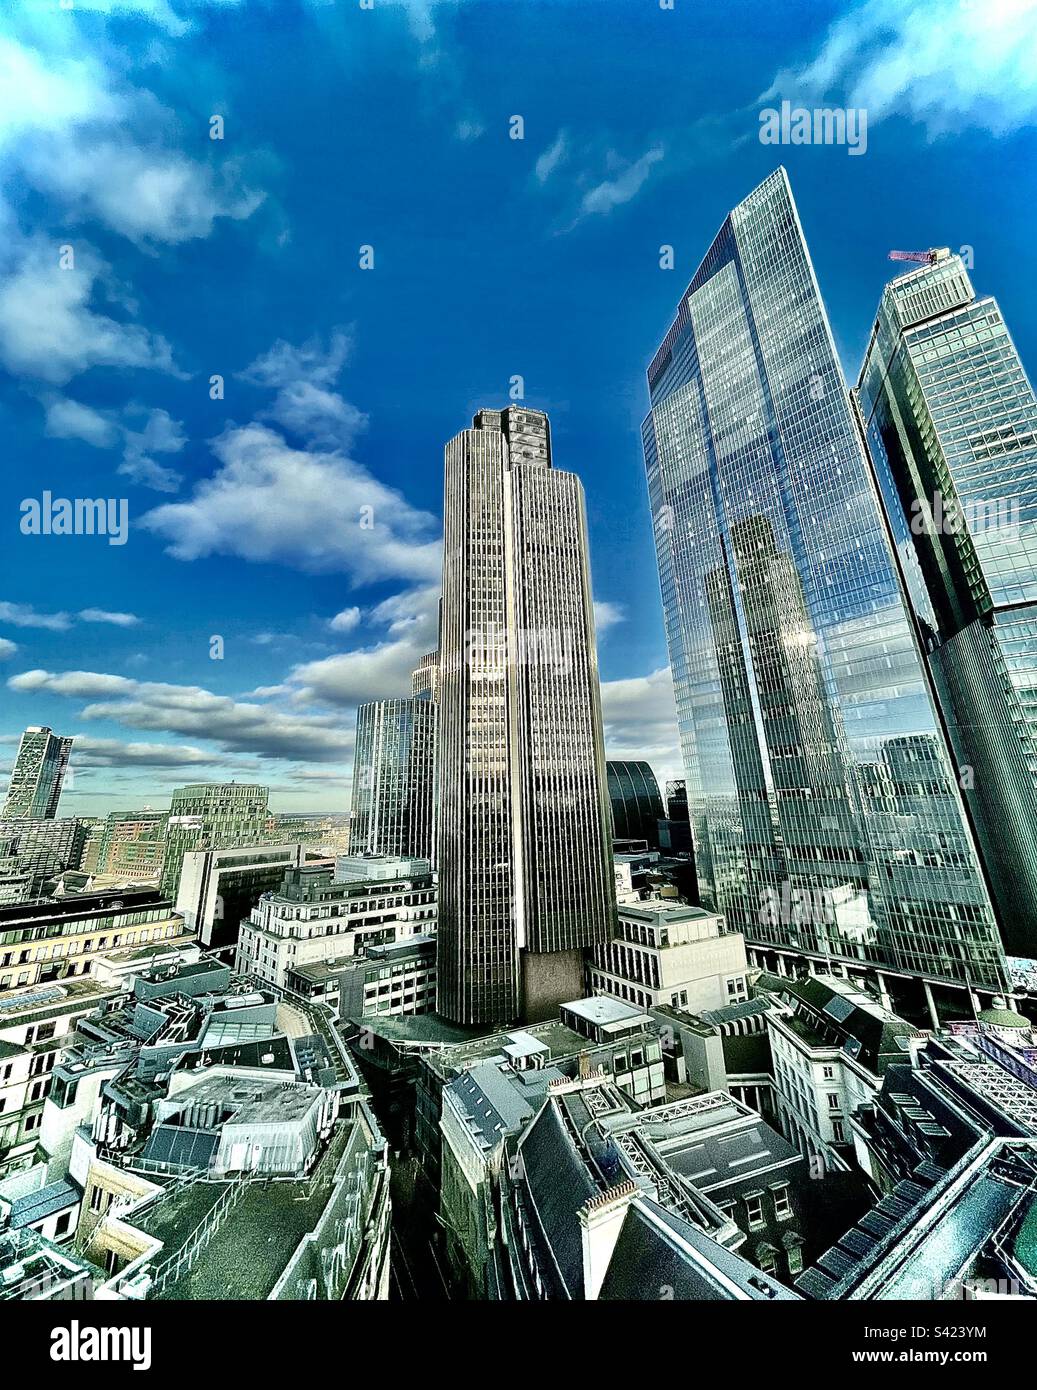 View of Tower 42 and 22 Bishopsgate buildings on a sunny day in the City of London, England Stock Photo